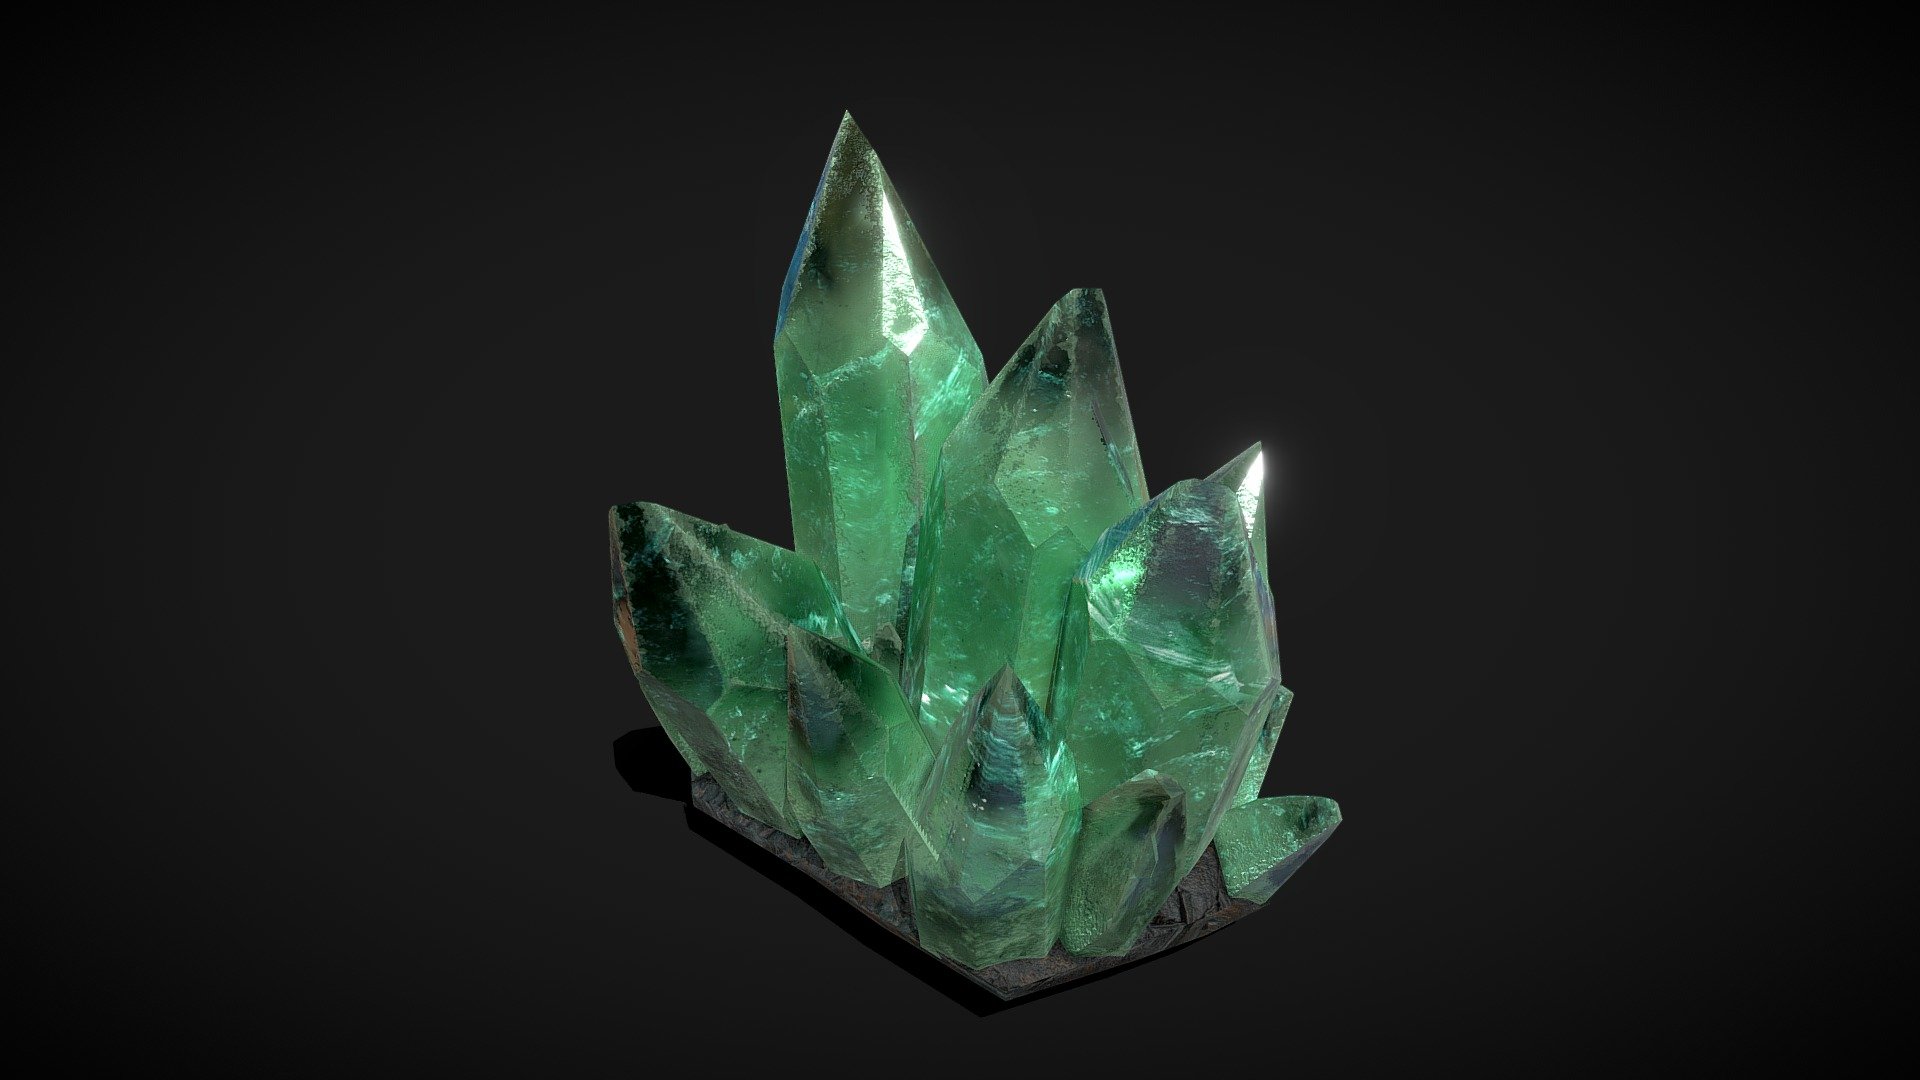 Green Crystal / Ghost quartz / Phantom quartz - low poly

Triangles: 957
Vertices: 573

4096x4096 PNG texture

Minerals Collection &lt;&lt; - Green Crystal / Ghost quartz - low poly - Buy Royalty Free 3D model by Karolina Renkiewicz (@KarolinaRenkiewicz) 3d model